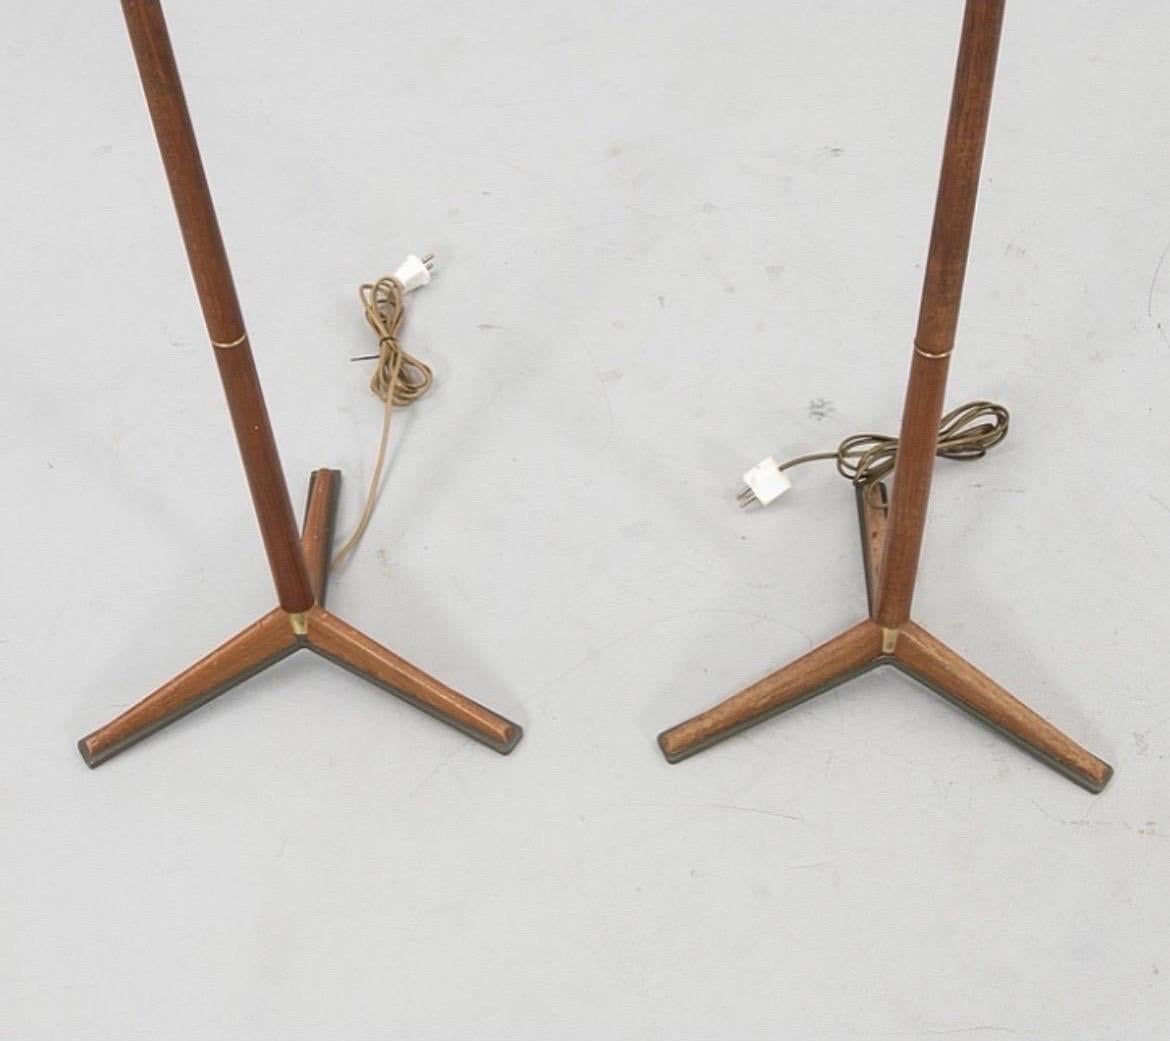 Pair of Swedish Floor Lamps, Teak and brass, Sweden 1960 For Sale 2